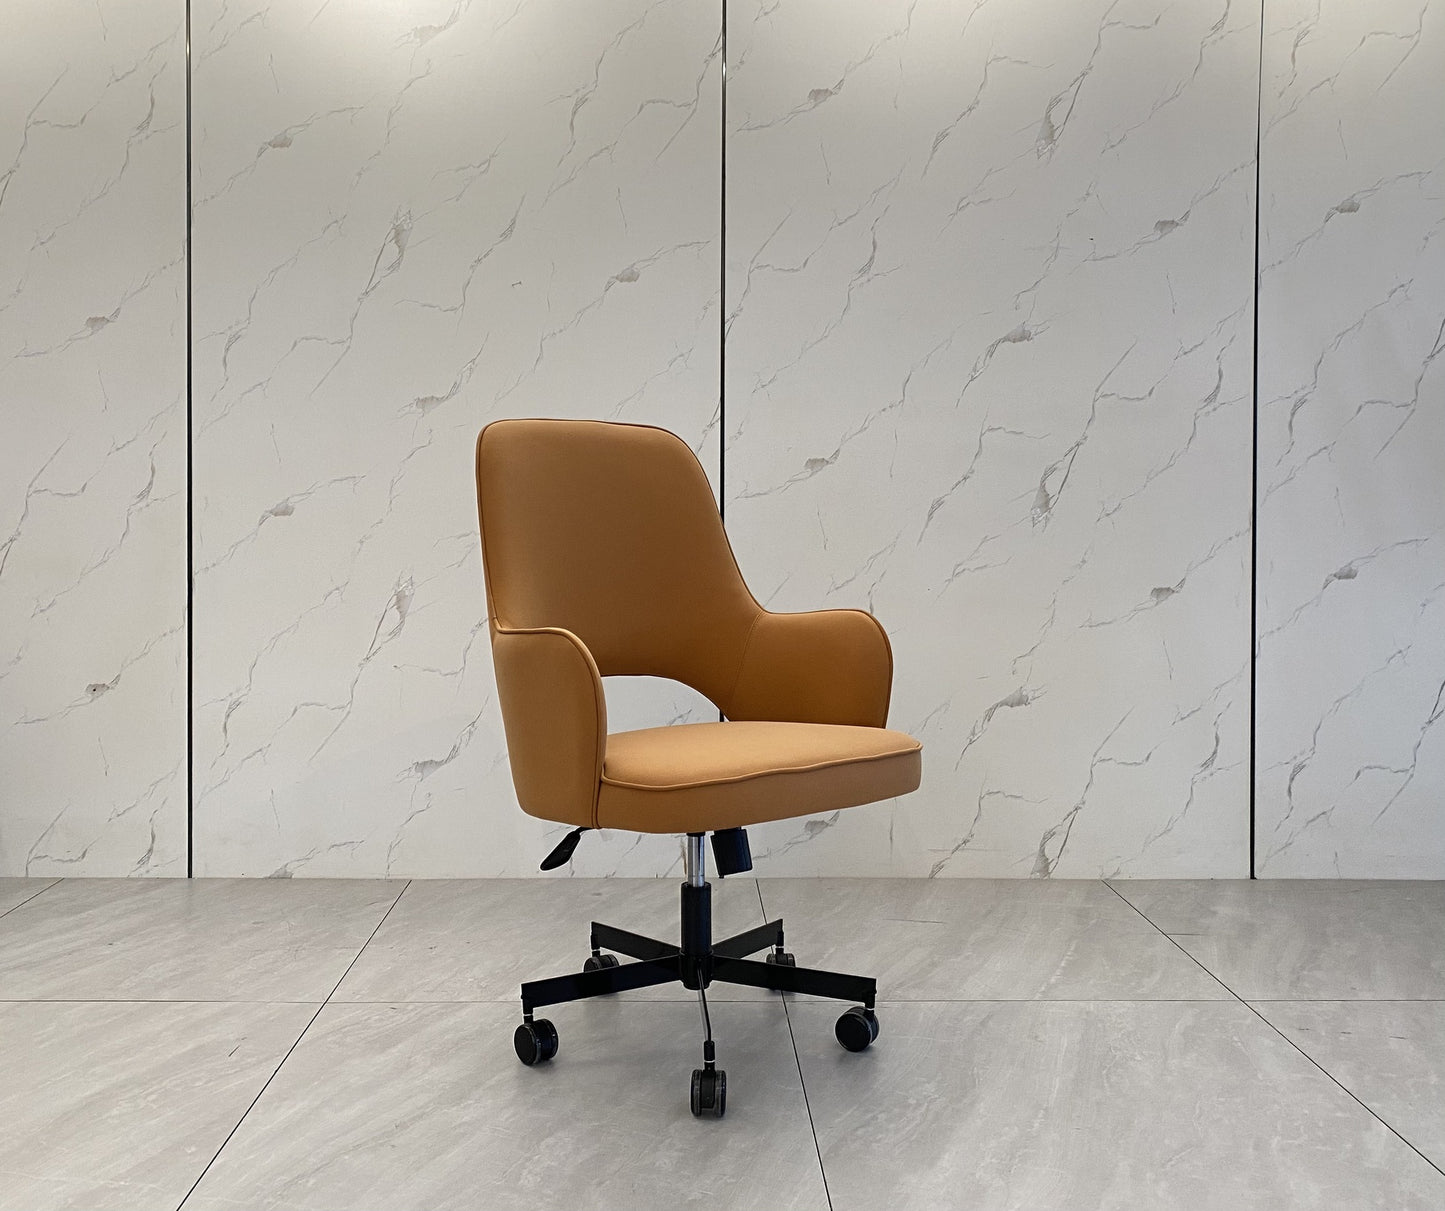 Baxter Colette Office Office Chair